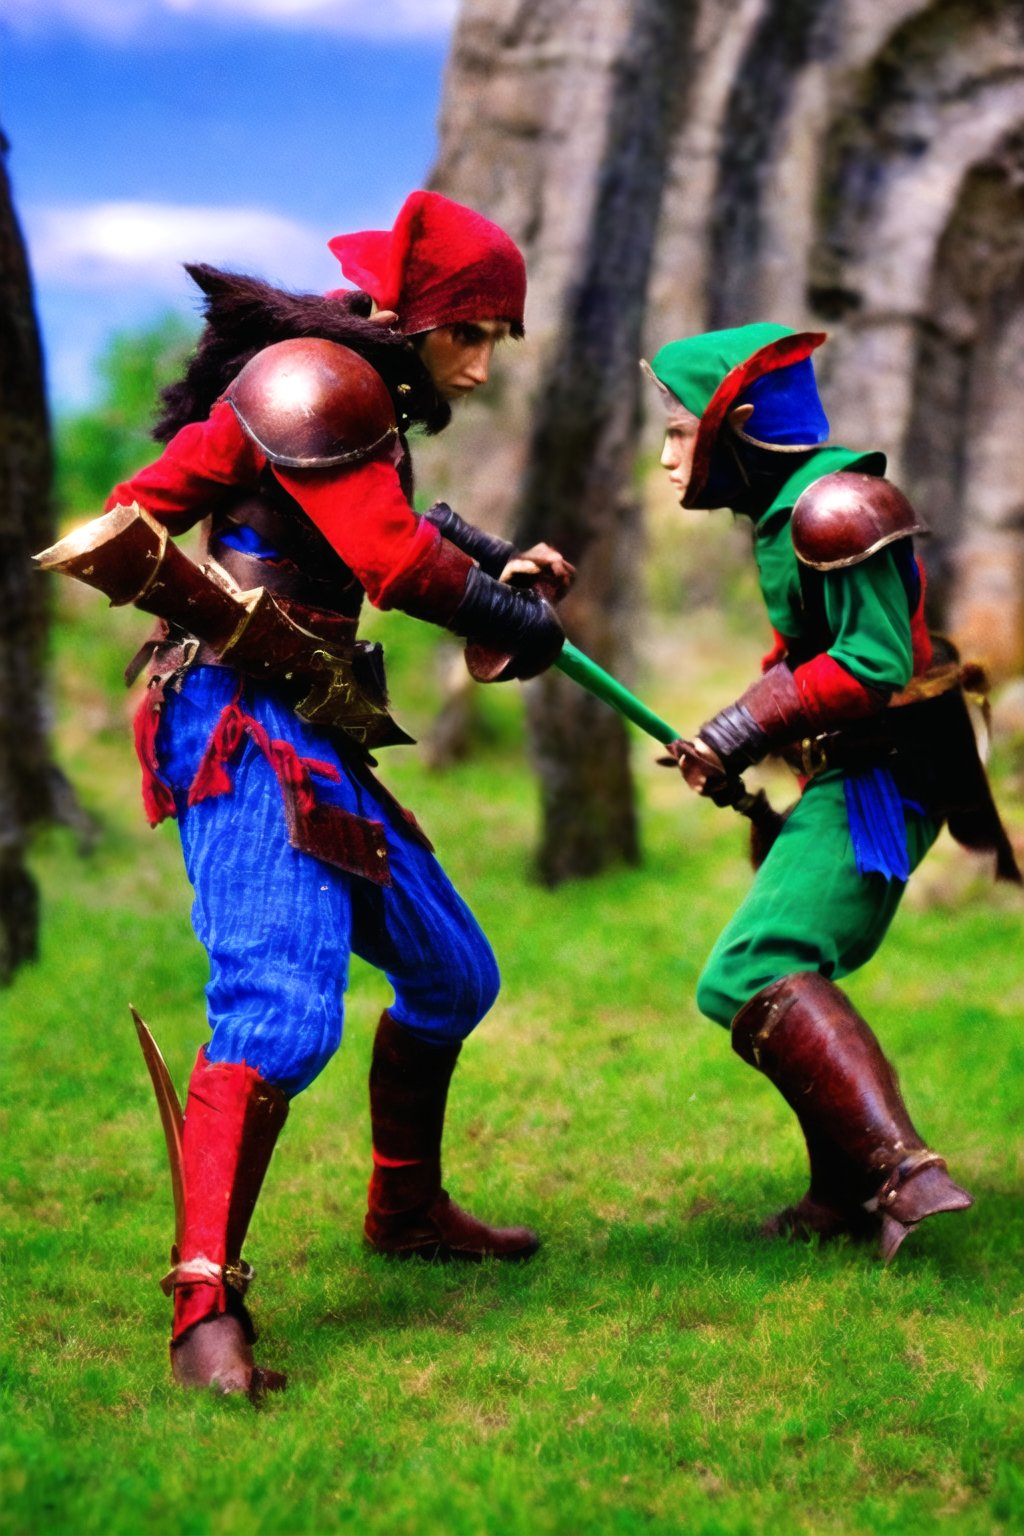 Elf warriors fight against invaders